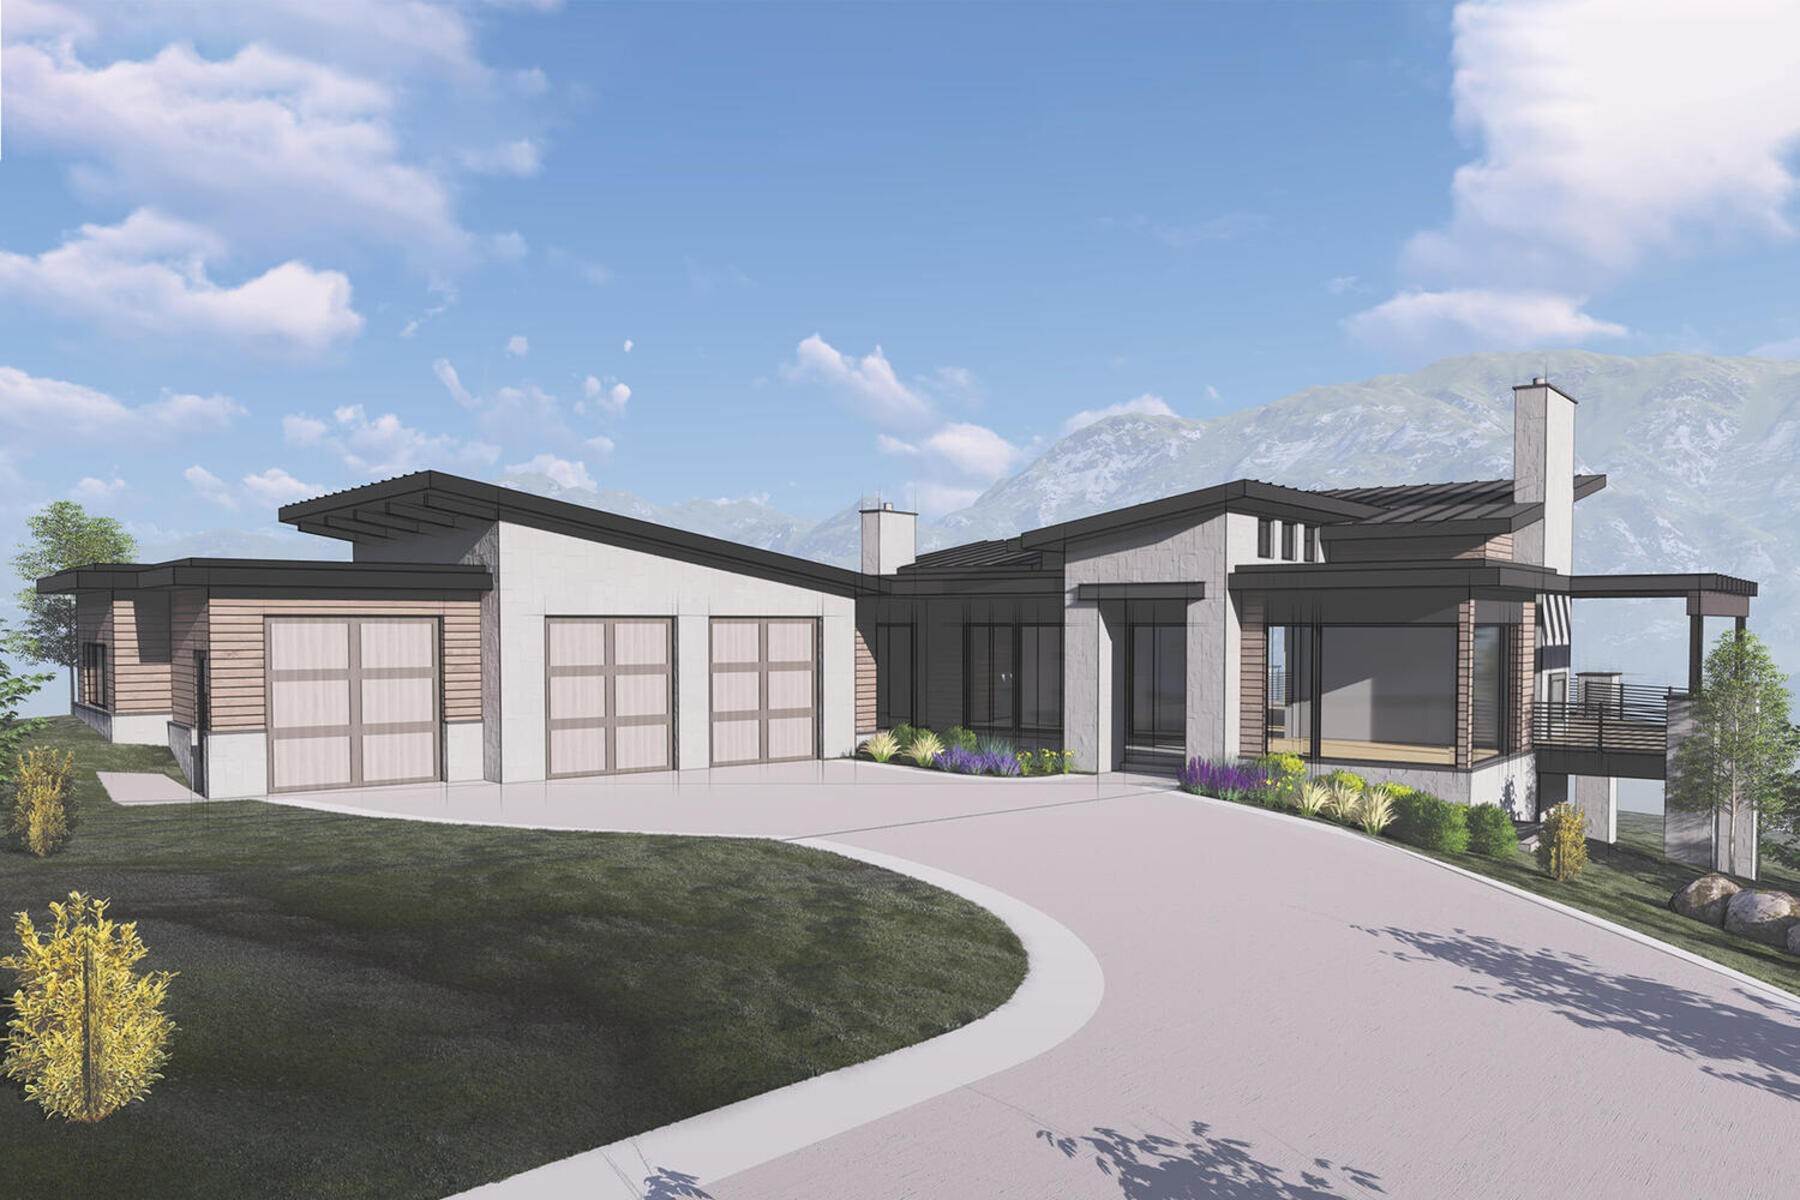 Single Family Homes for Sale at NEW Construction Home in Red Ledges! 1094 N Explorer Peak Drive Heber City, Utah 84032 United States